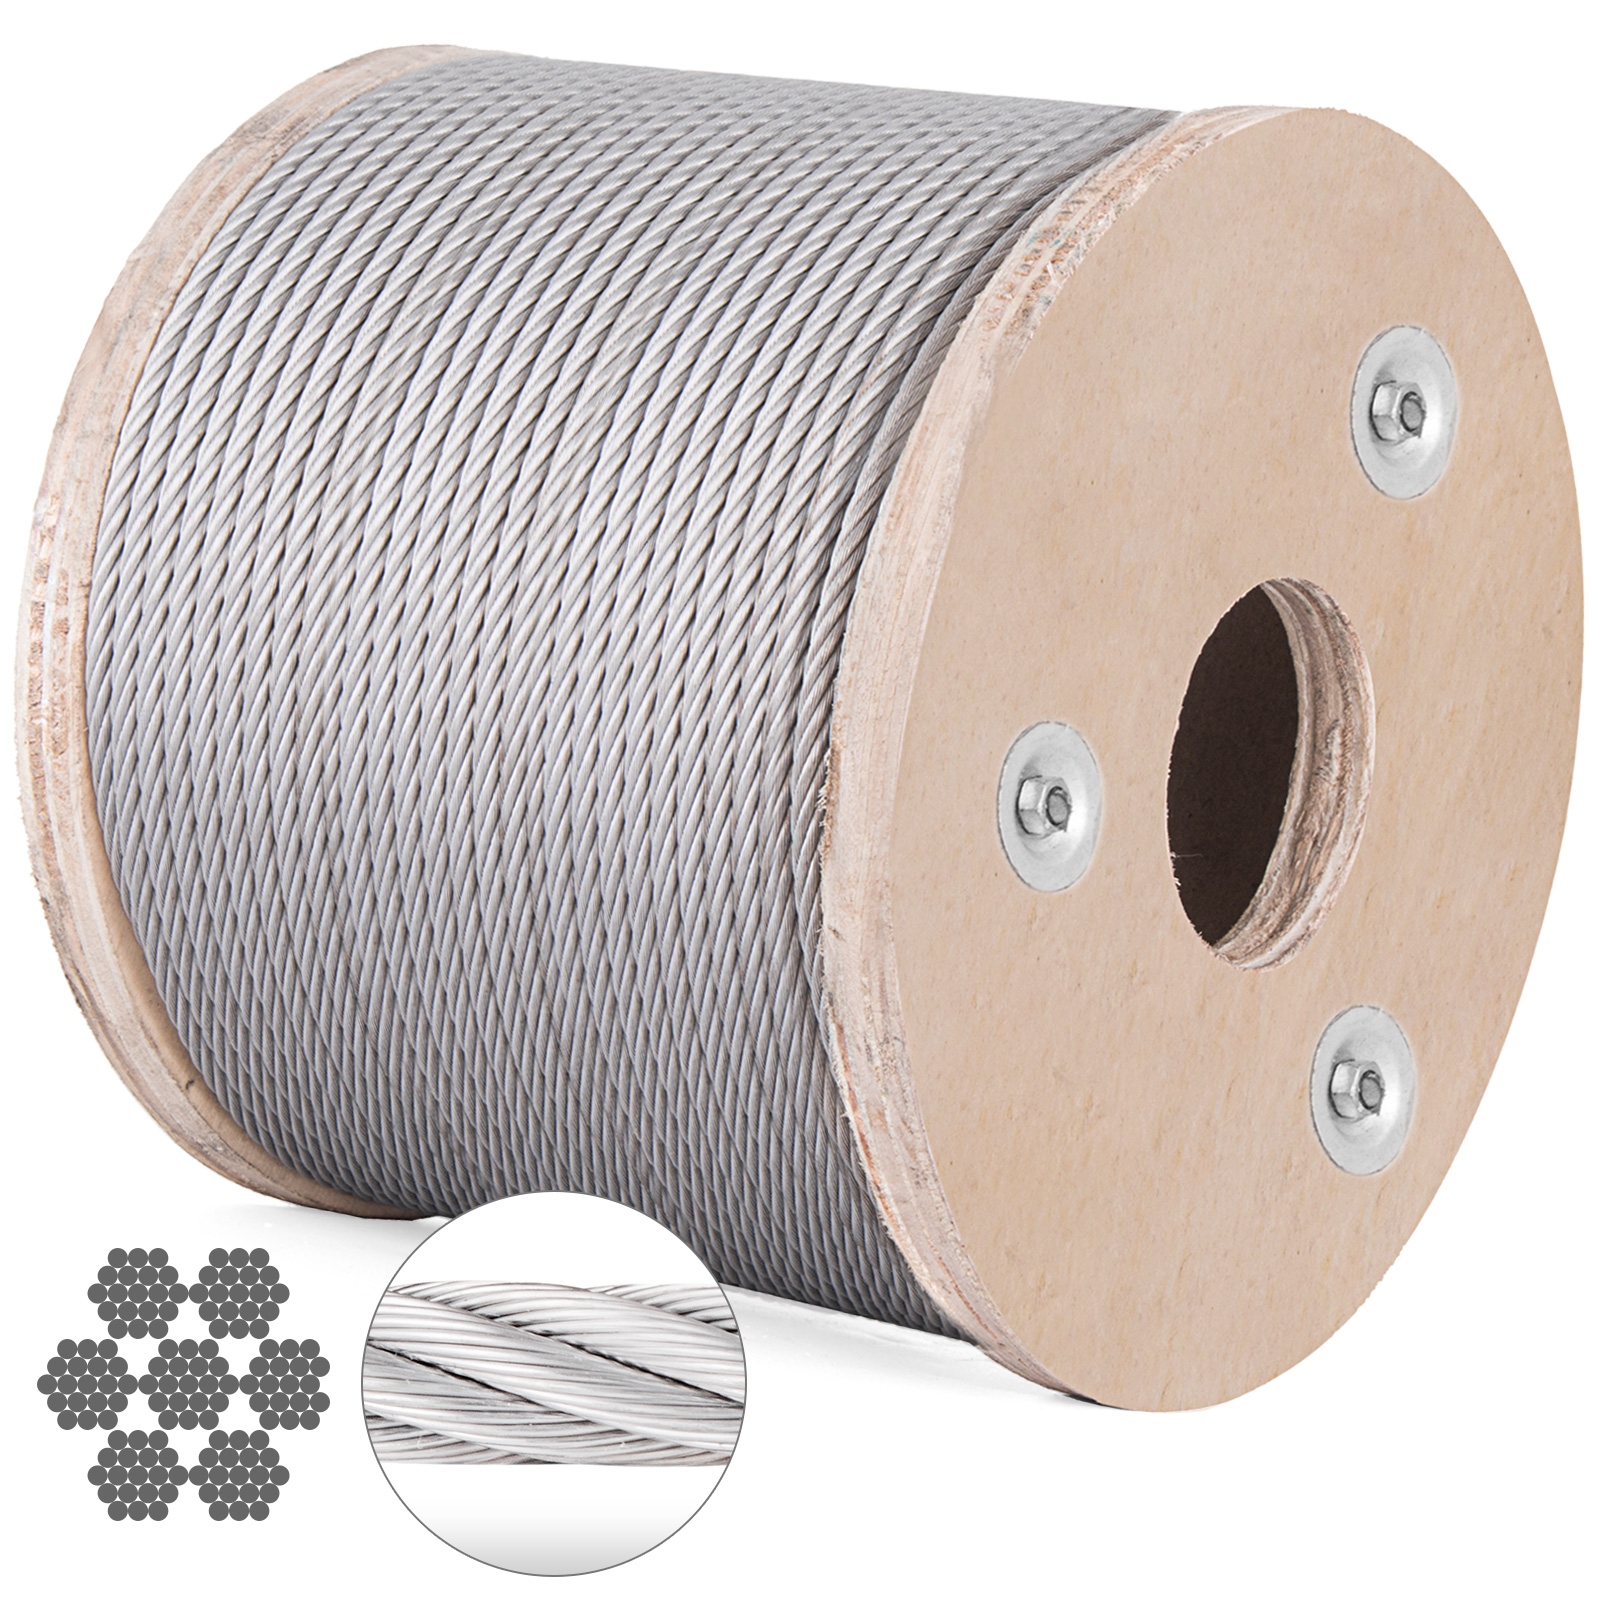 1/4 Stainless Steel Cable Wire Rope 7x19 Type 304 (100 Feet) 865472618326 eBay